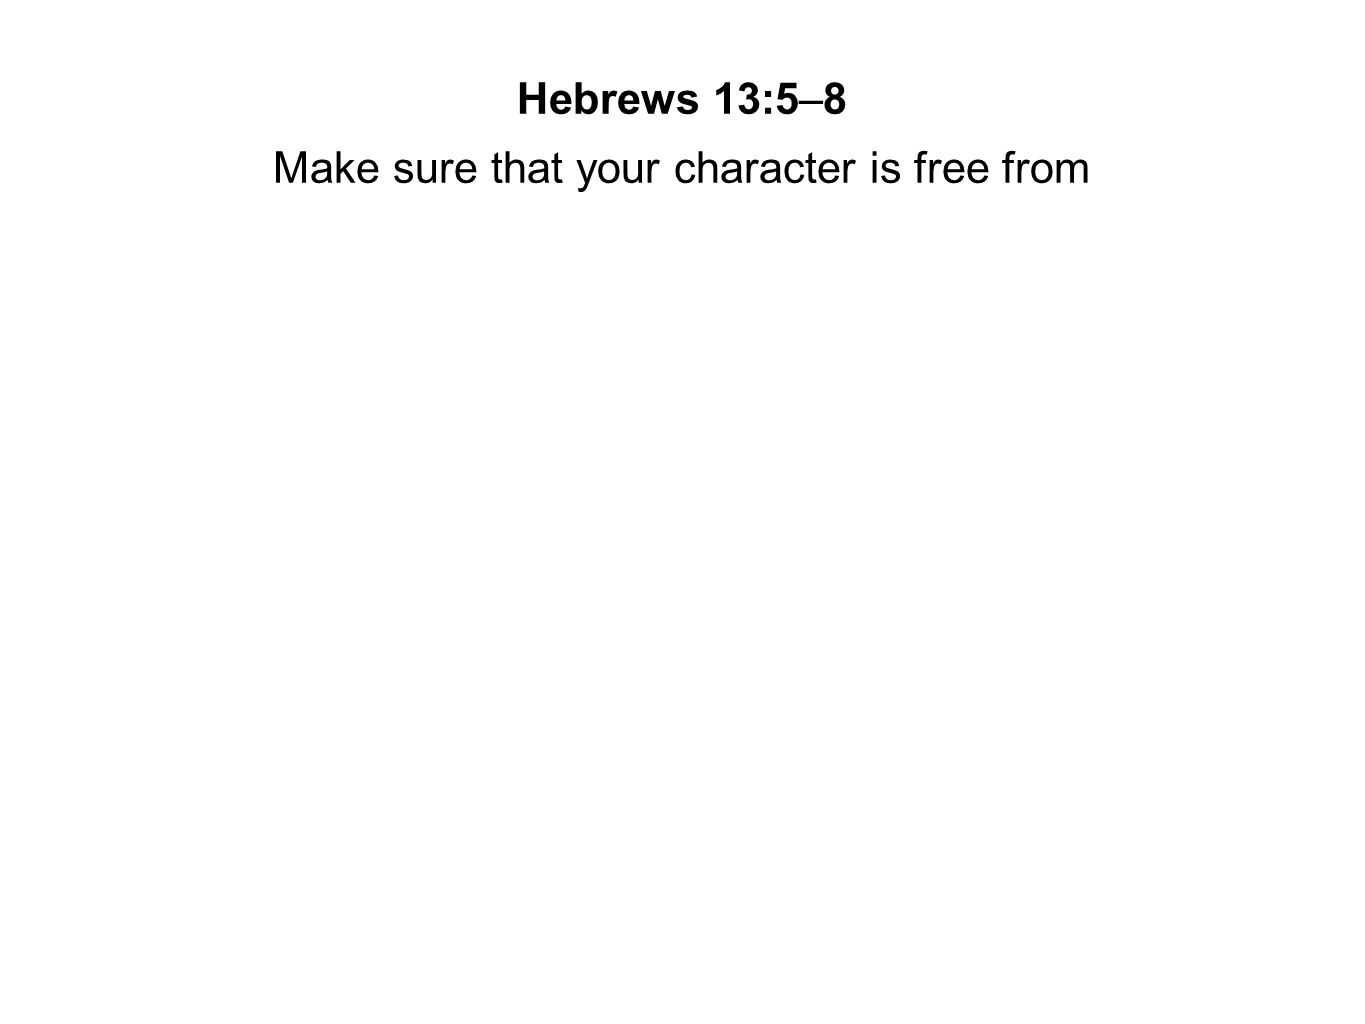 Make sure that your character is free from